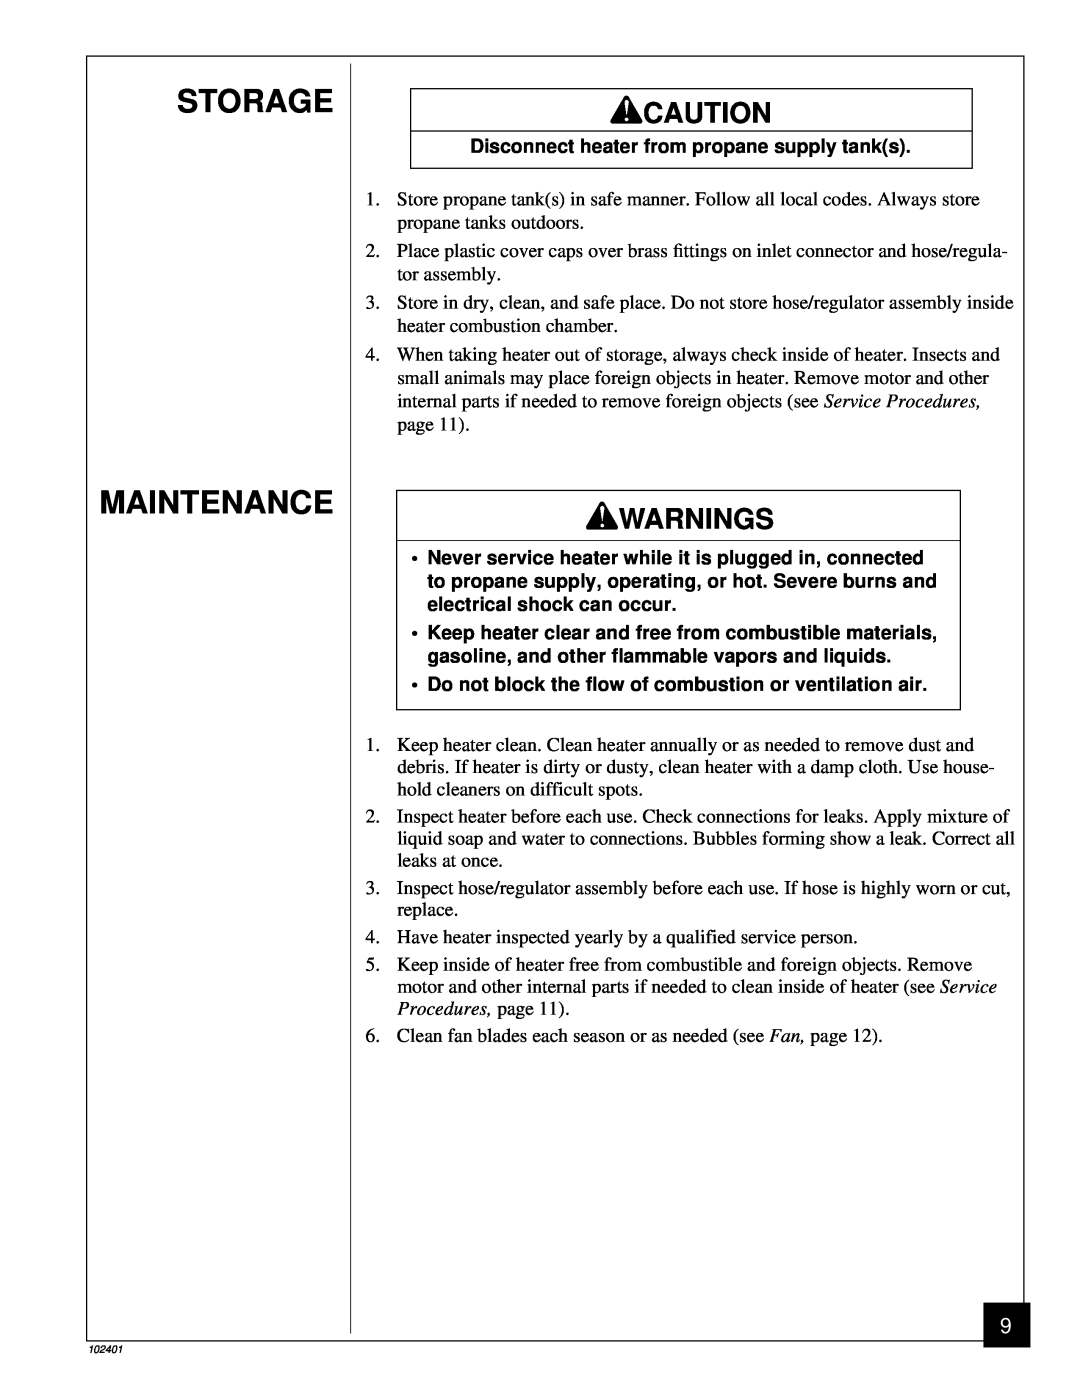 Desa RCLP50A owner manual Storage Maintenance, Disconnect heater from propane supply tanks, Warnings 